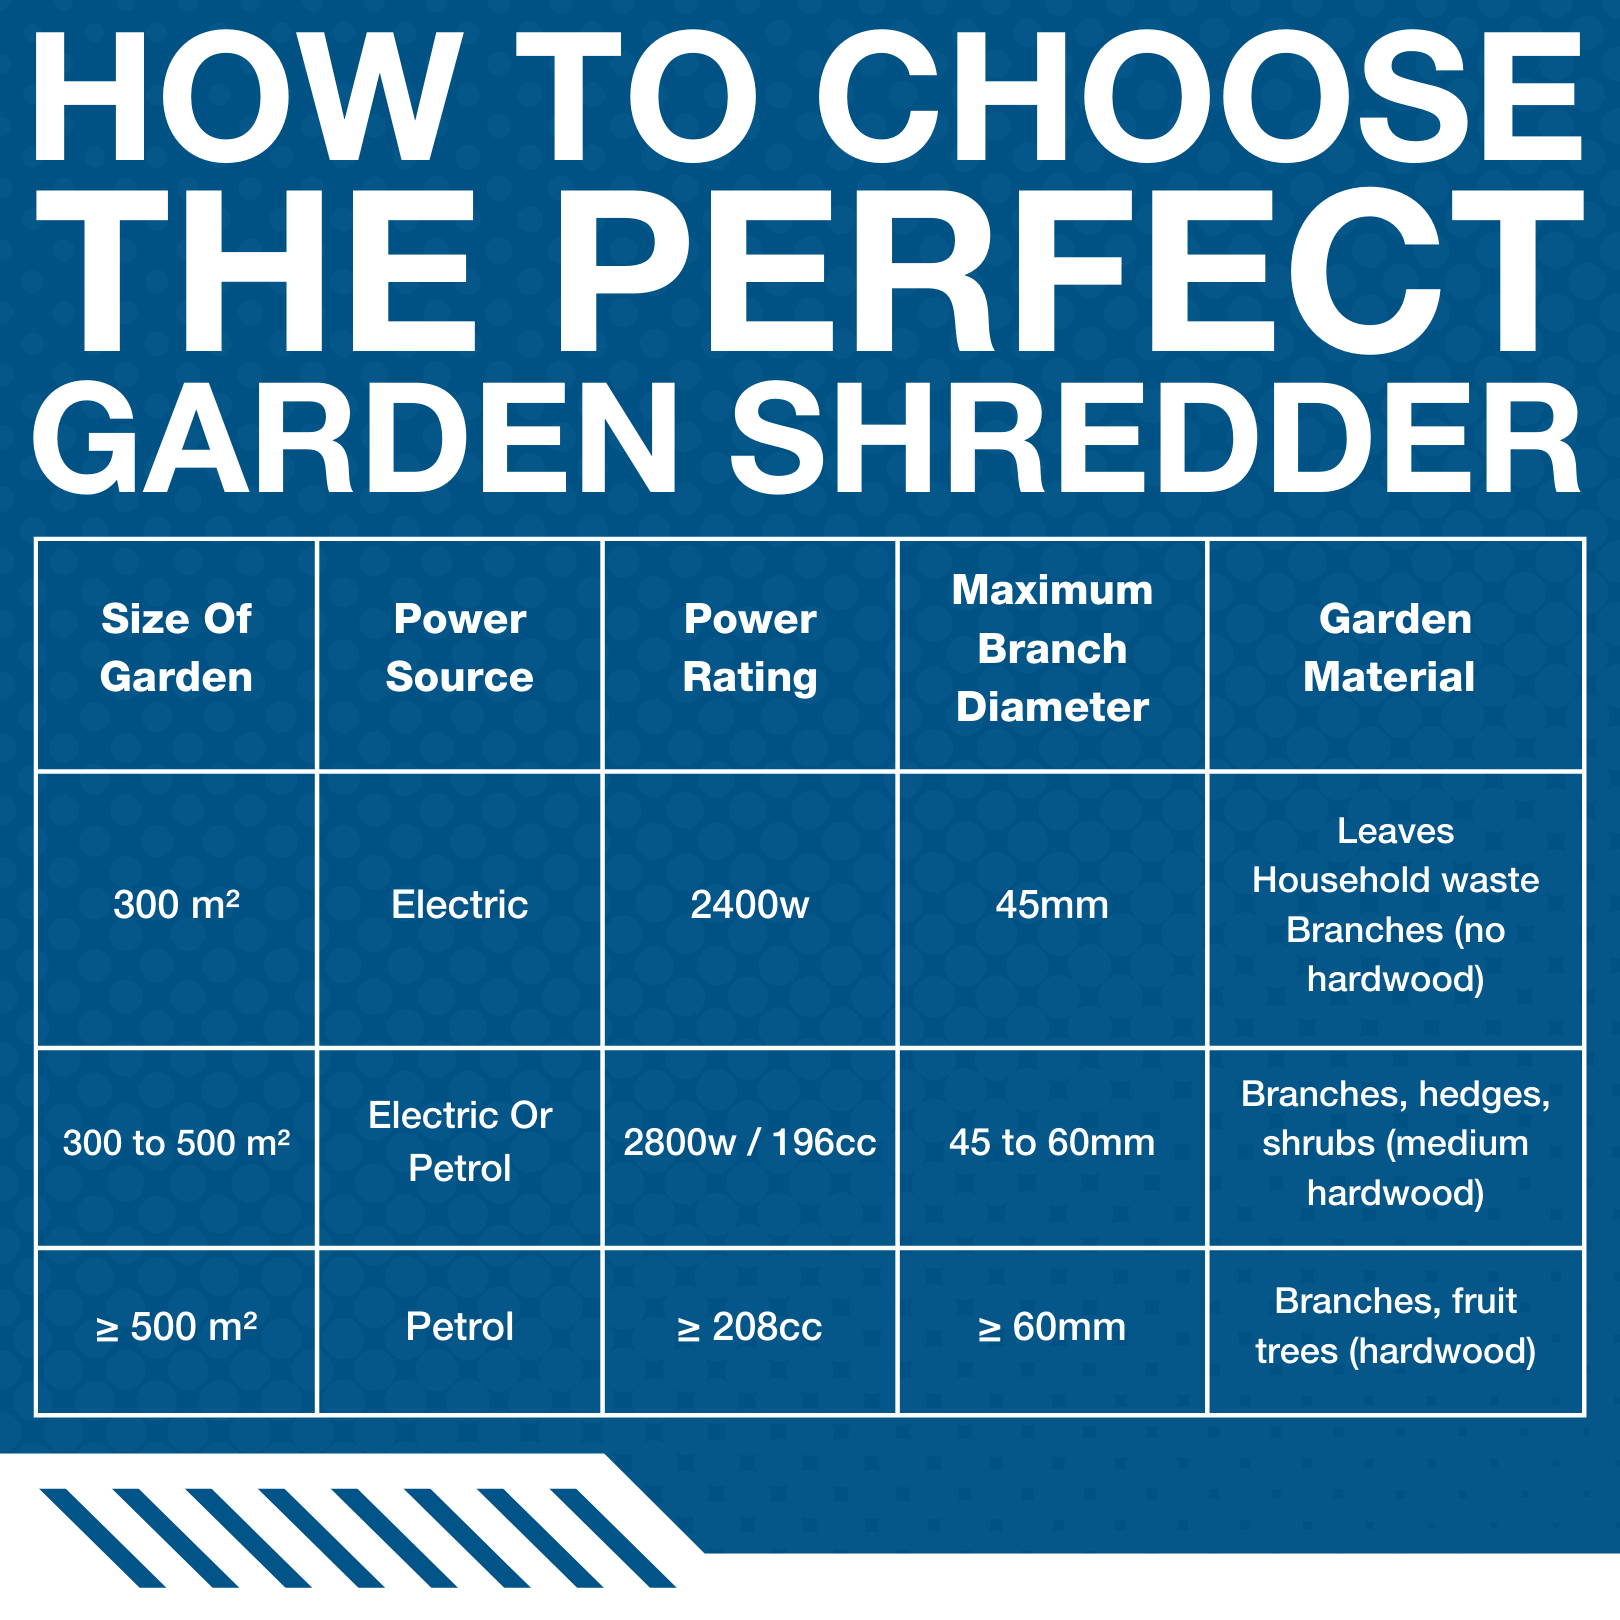 How to choose the perfect garden shredder